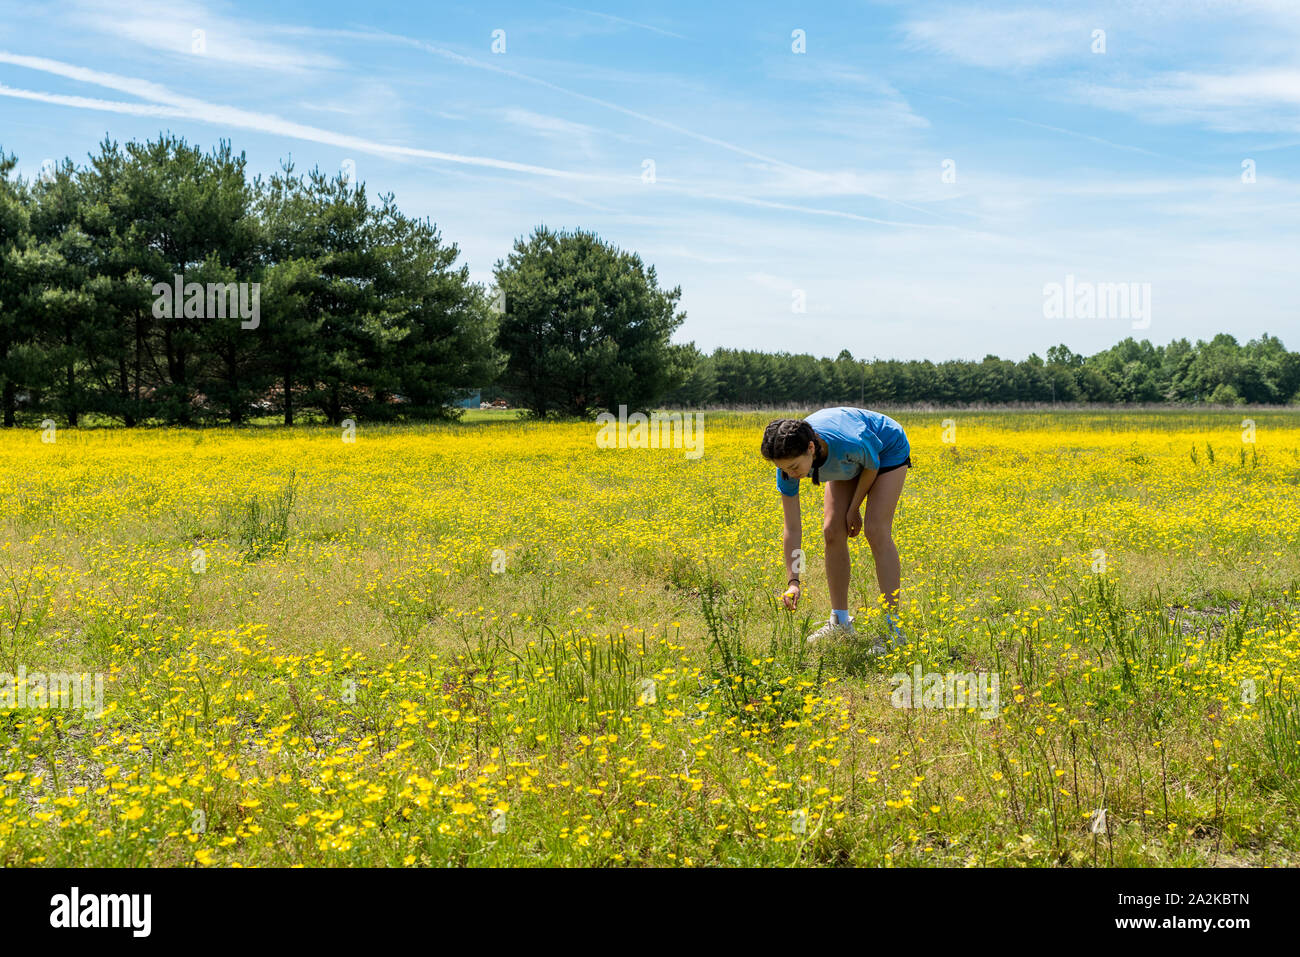 Teen girl bending over and picking flowers in large field with yellow flowers and trees in the background Stock Photo